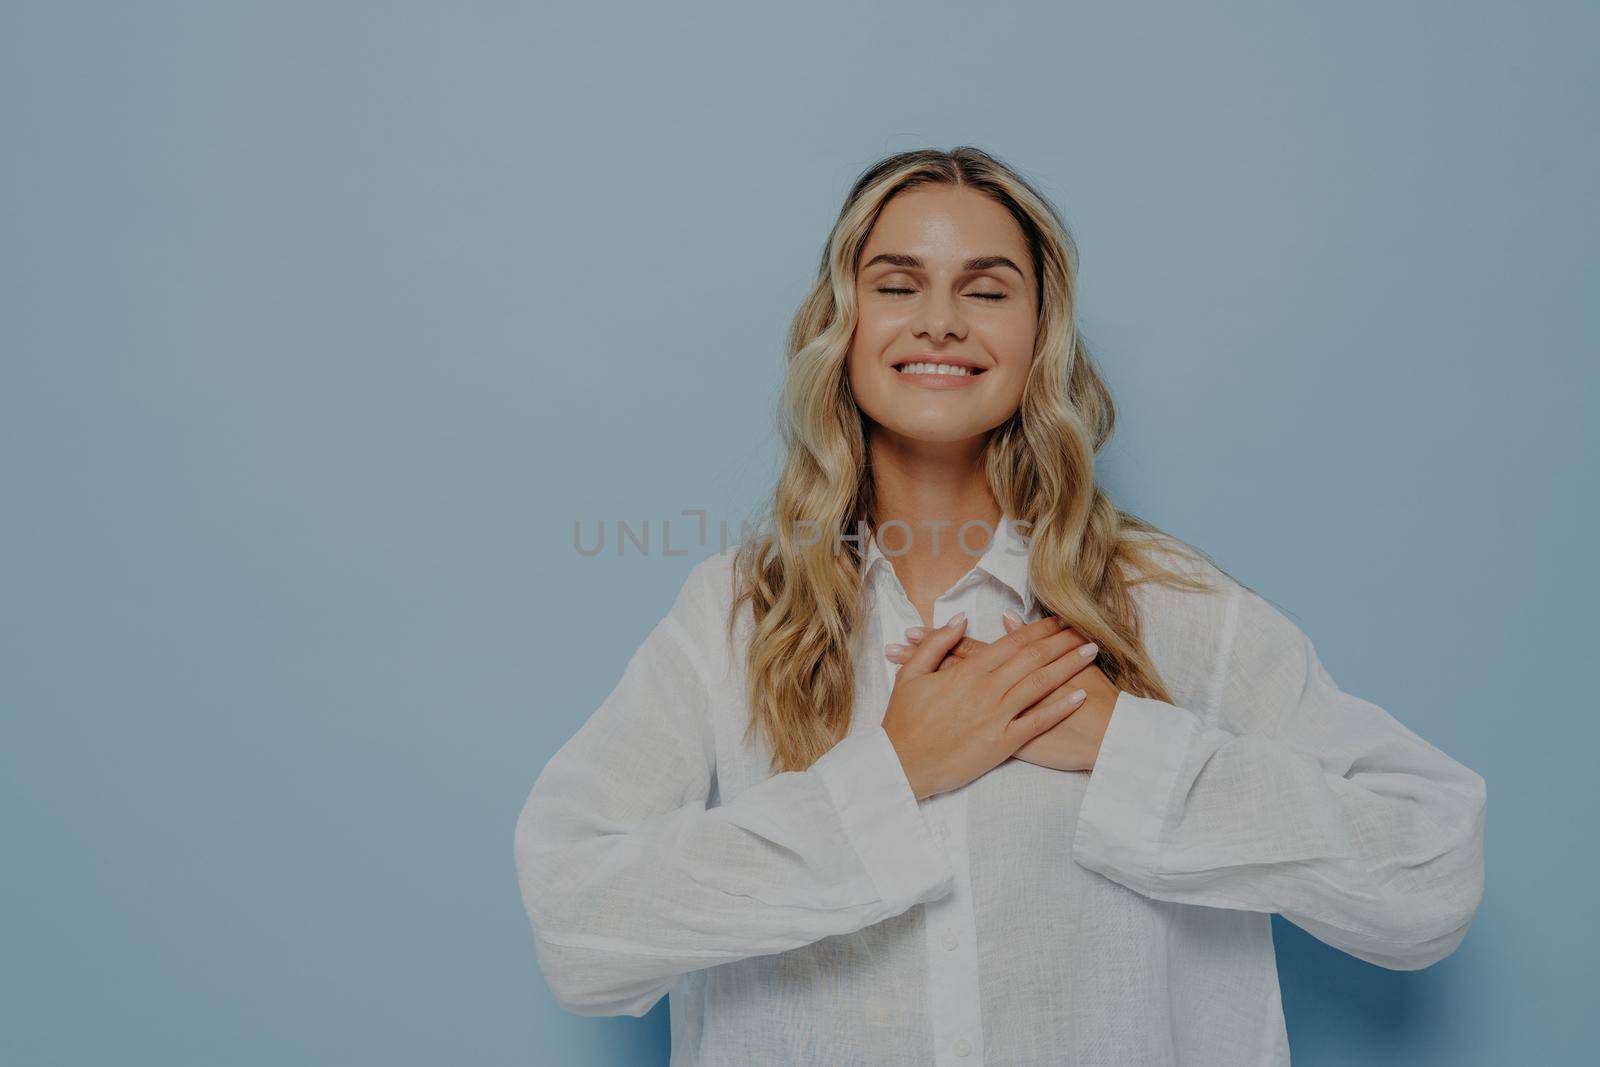 Pleased happy thankful woman with blond wavy hair in white oversize shirt gesturing appreciation and love and gratitude by holding hands together on chest, eyes closed, isolated over blue wall